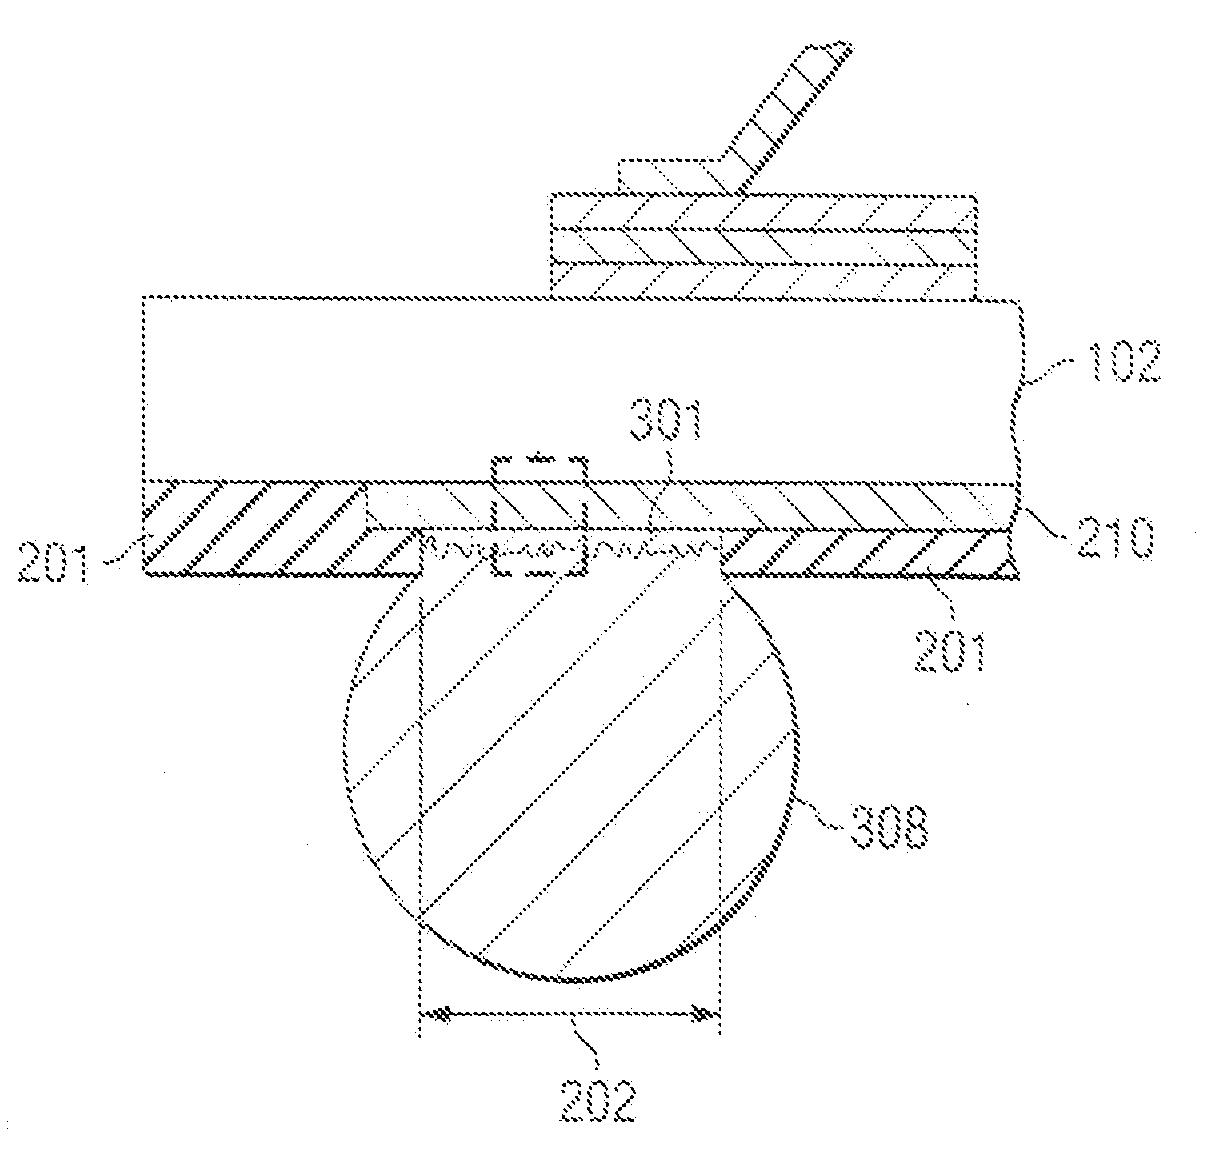 Semiconductor Device with Improved Contacts